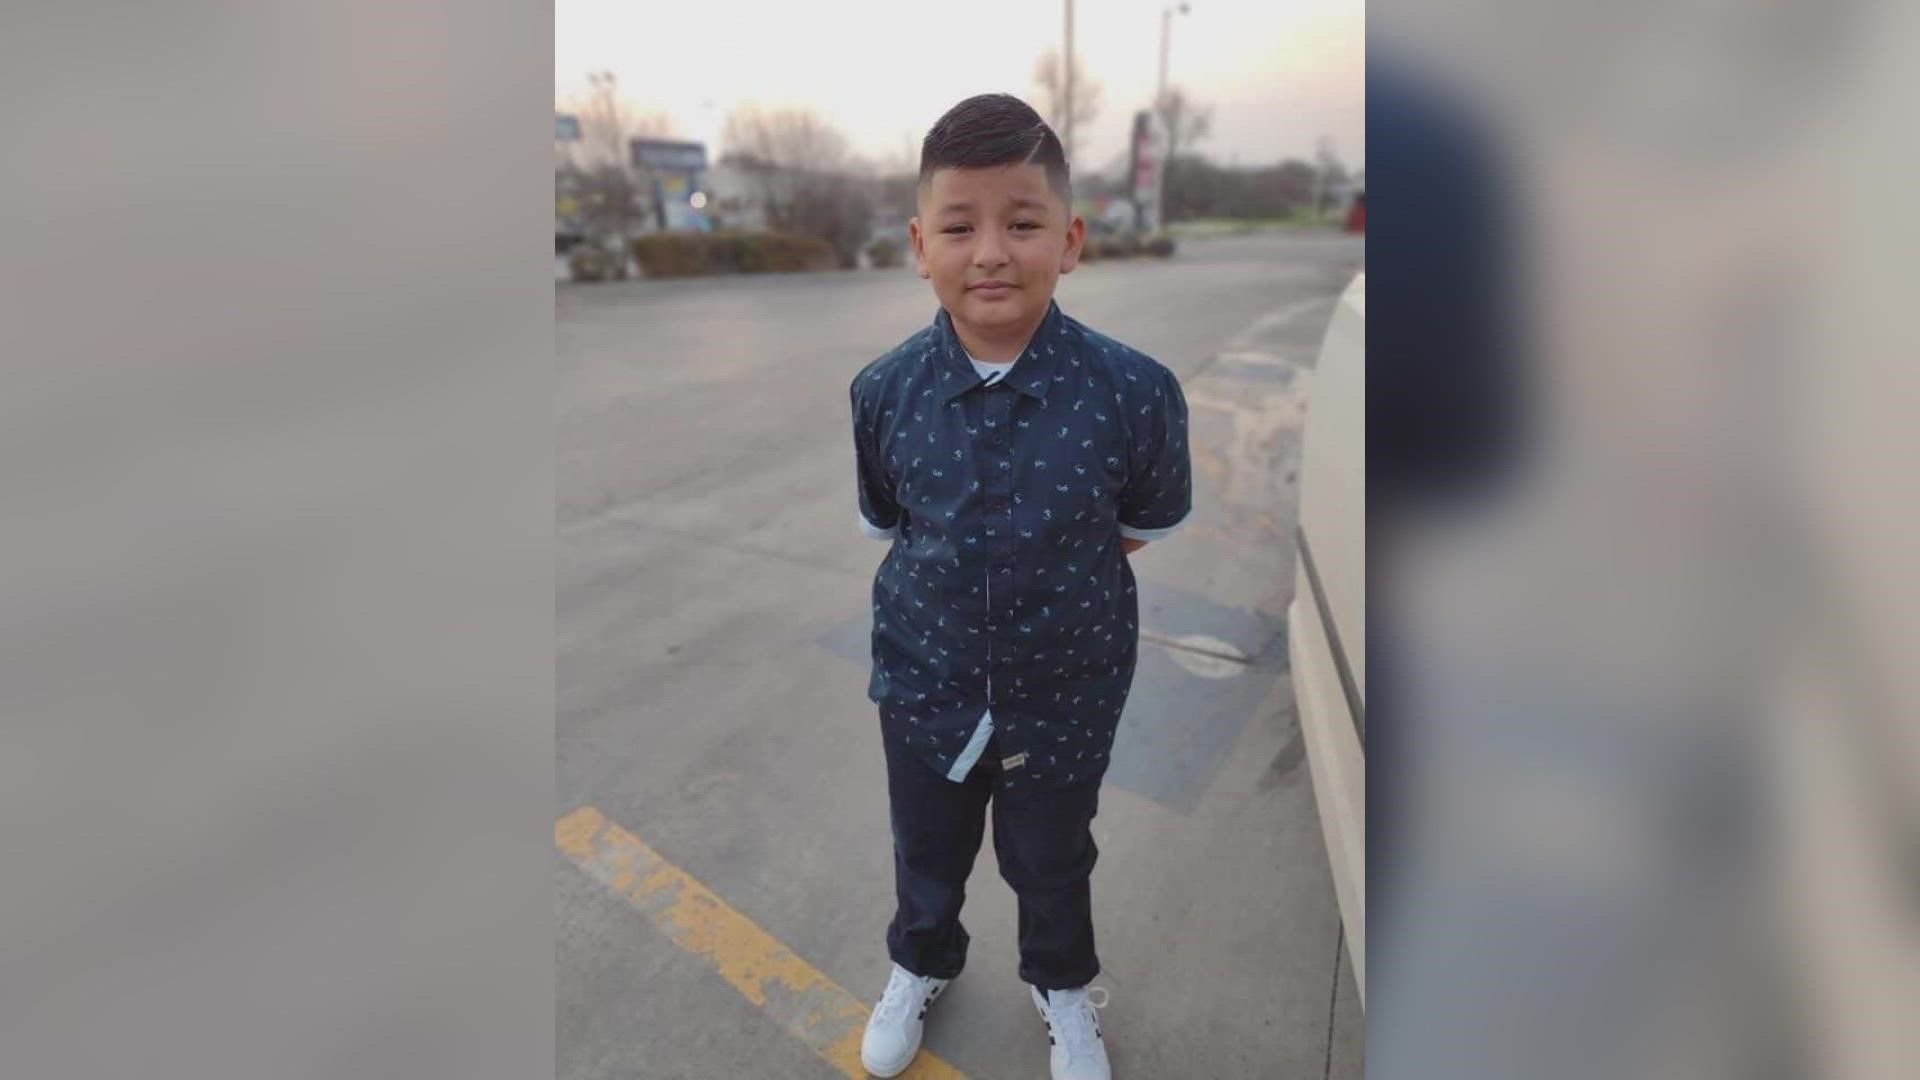 The family of Javier Lopez said the 10-year-old was a 4th grader at Robb Elementary School.